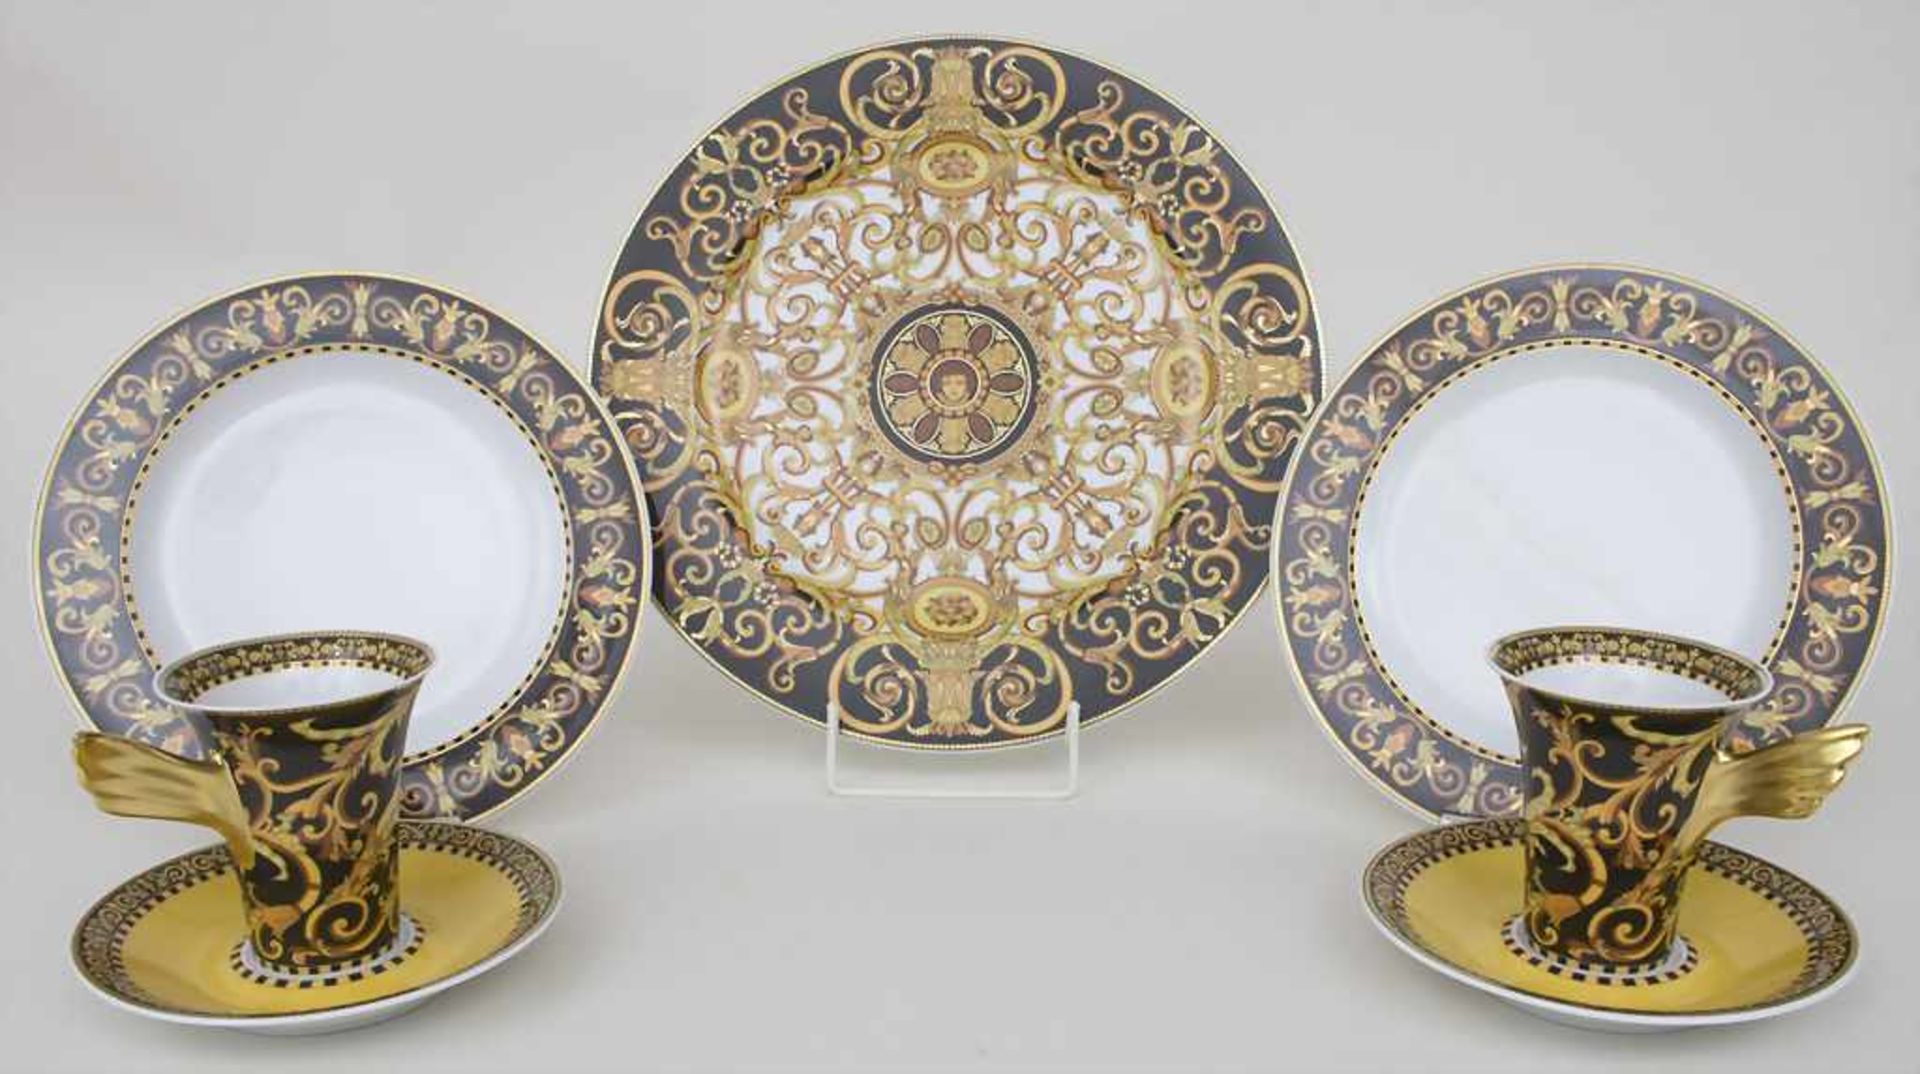 2 Gedecke mit Platte 'Barocco' / 2 place settings with a plate 'Barocco', Versace für Rosenthal, 20.